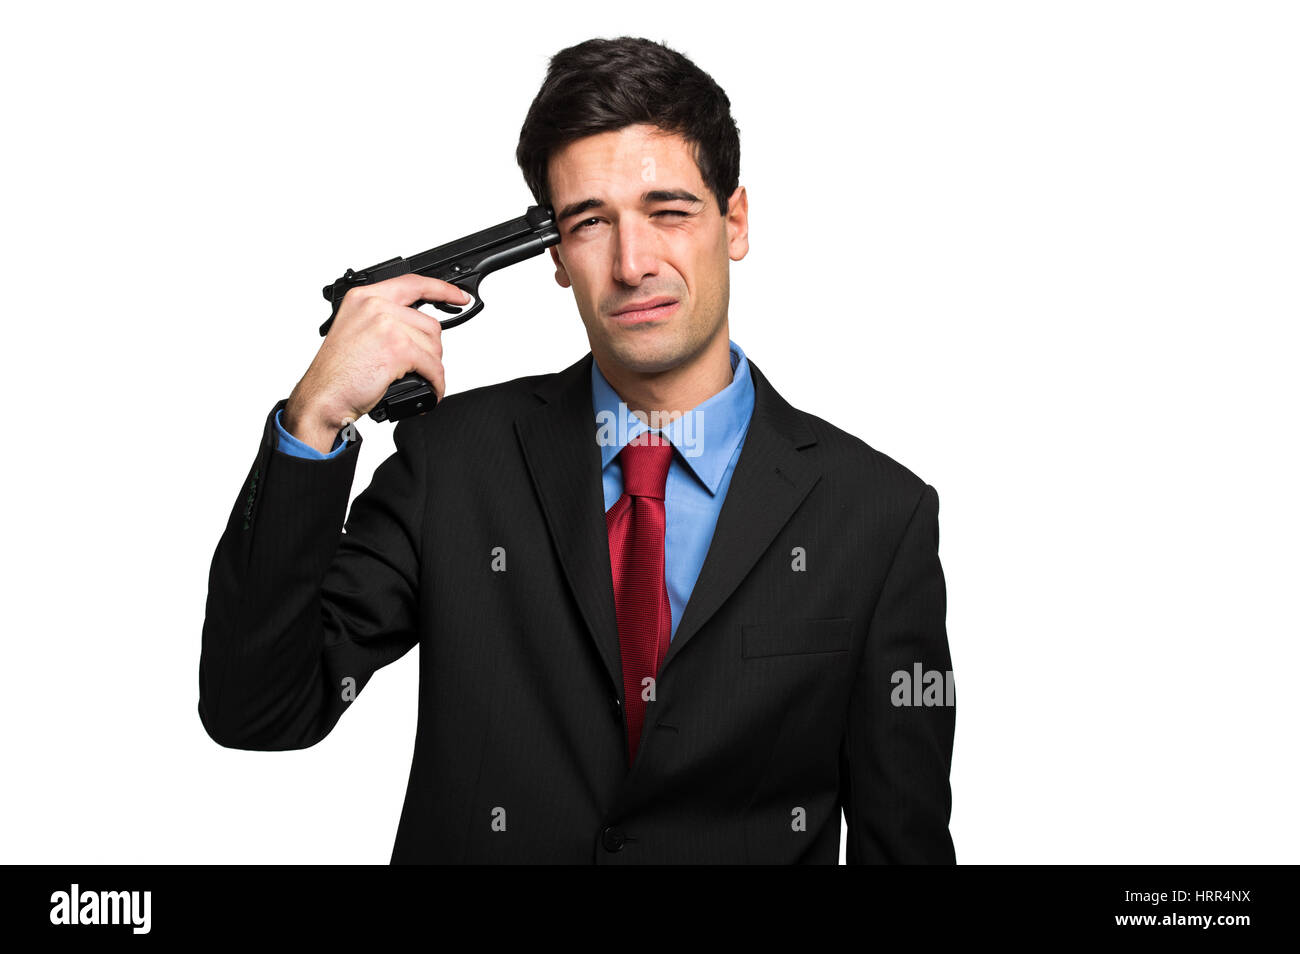 Young man in business suit with gun trying to make suicide Stock Photo